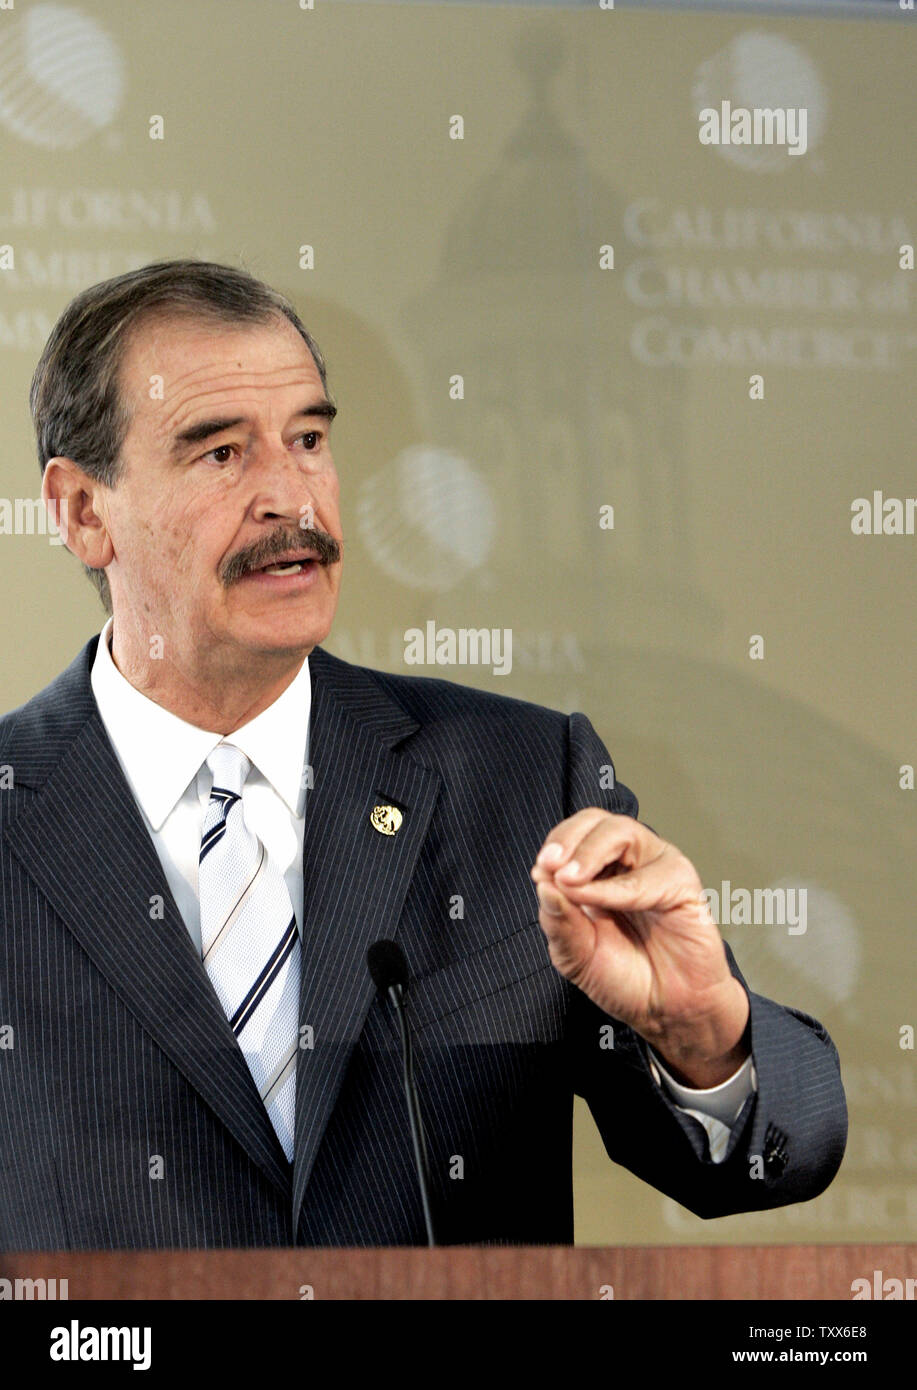 Mexican President Vicente Fox gestures as he speaks at the California Chamber of Commerce in Sacramento, California, on May 26, 2006.  Fox praised the U.S. Senate for passing an immigration bill calling it, a 'monumental step forward' that marks a historic moment in the relationship between Mexico and the United States.  (UPI Photo/Rich Pedroncelli, POOL) Stock Photo